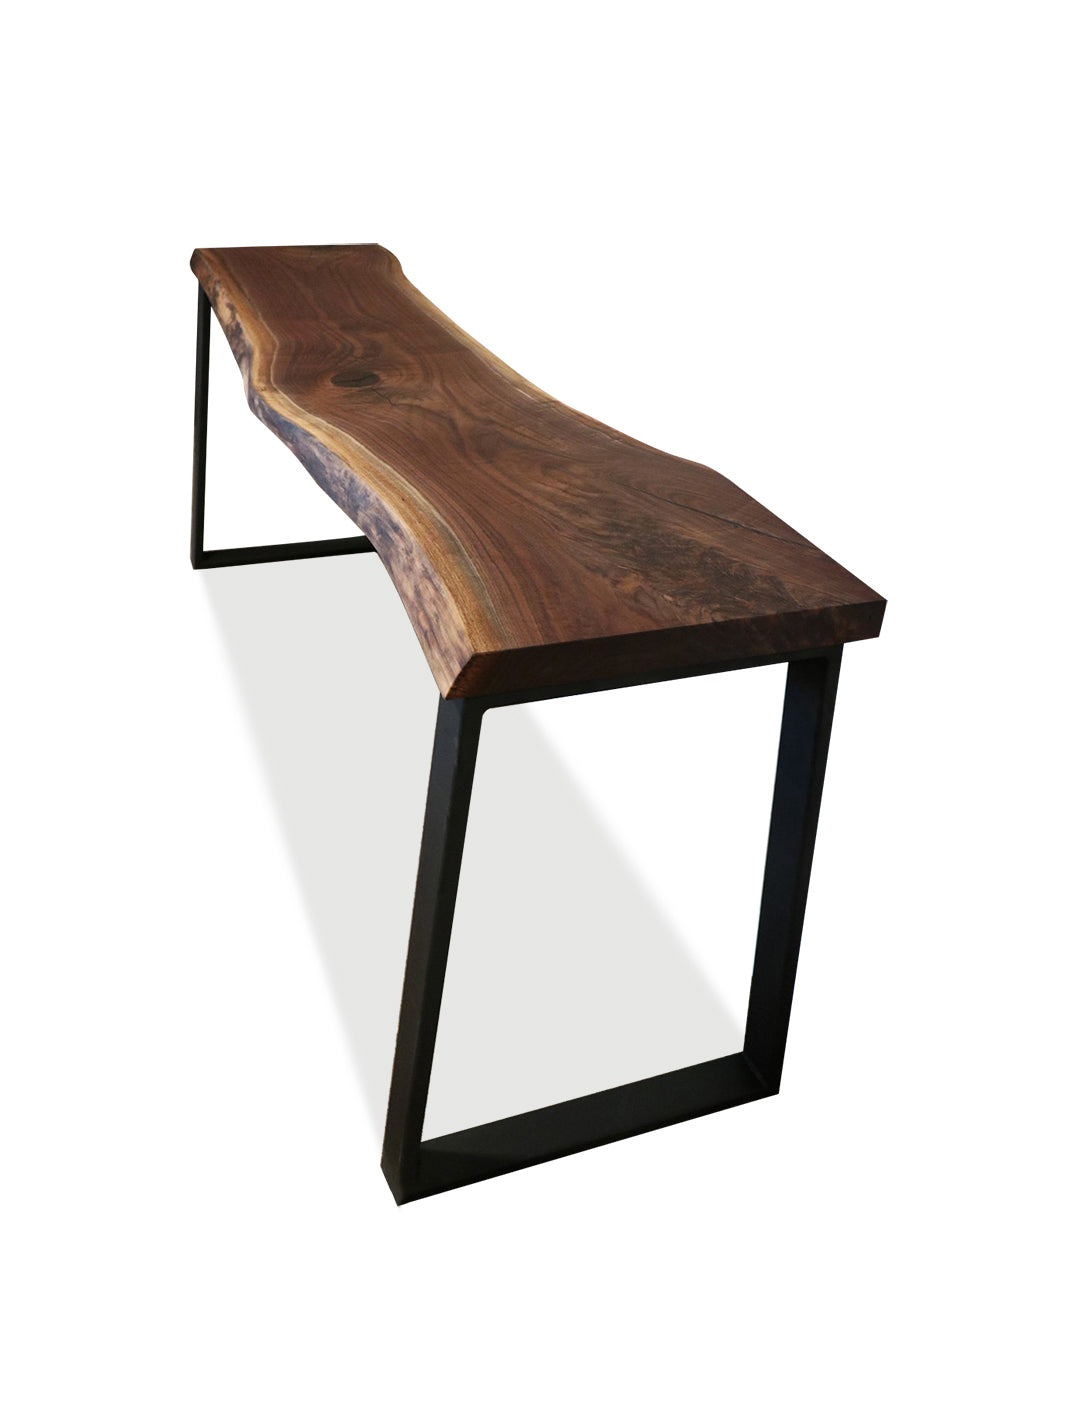 Narrow Live Edge Walnut Bar Table with Metal Base Earthly Comfort Dining Tables 1587